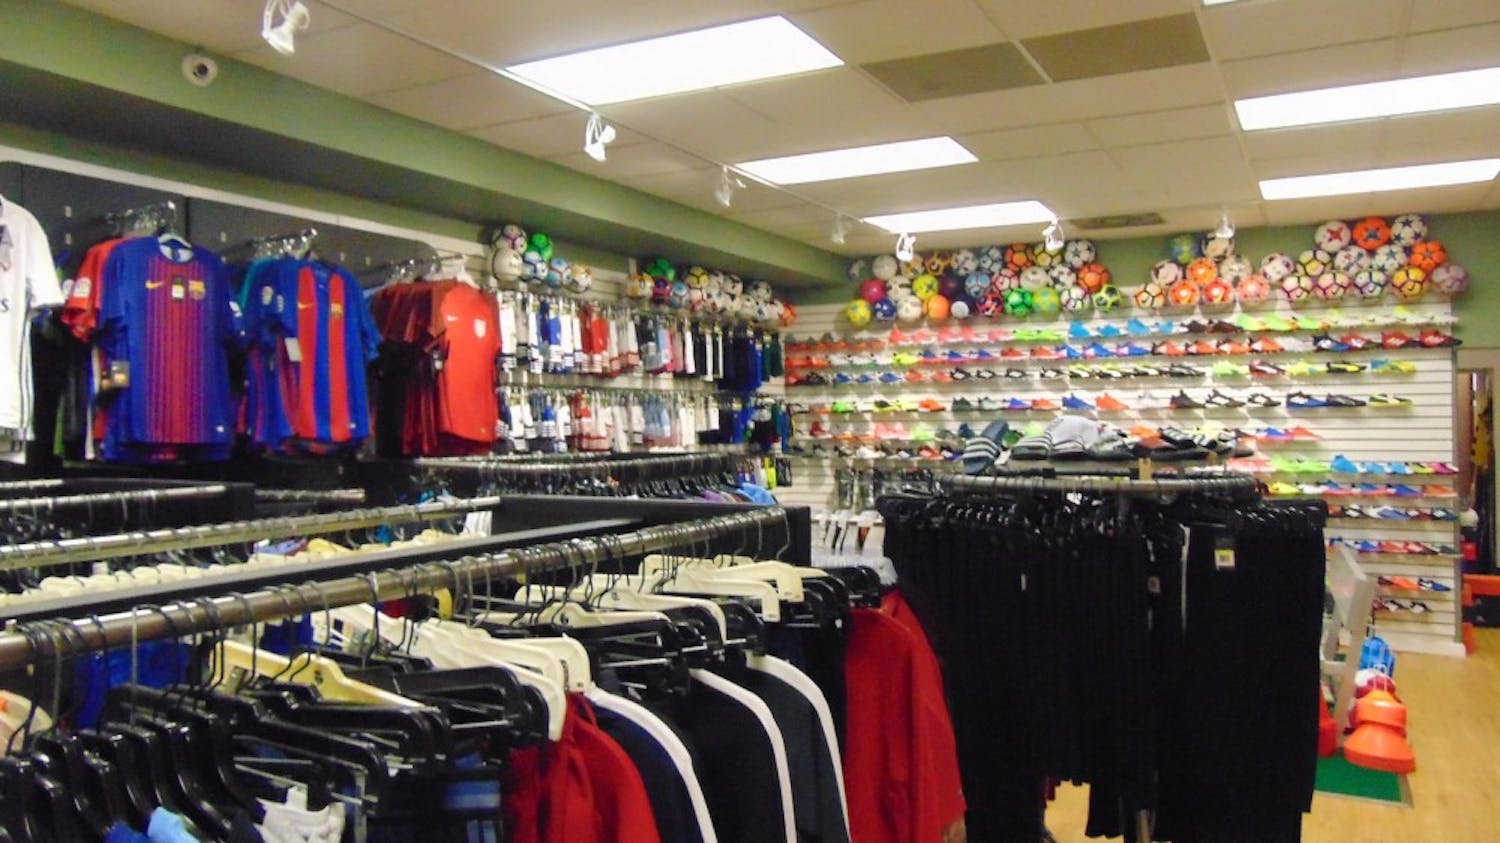 DC Soccer Supplies sells various soccer equipment, training gear and uniforms in Tenleytown.